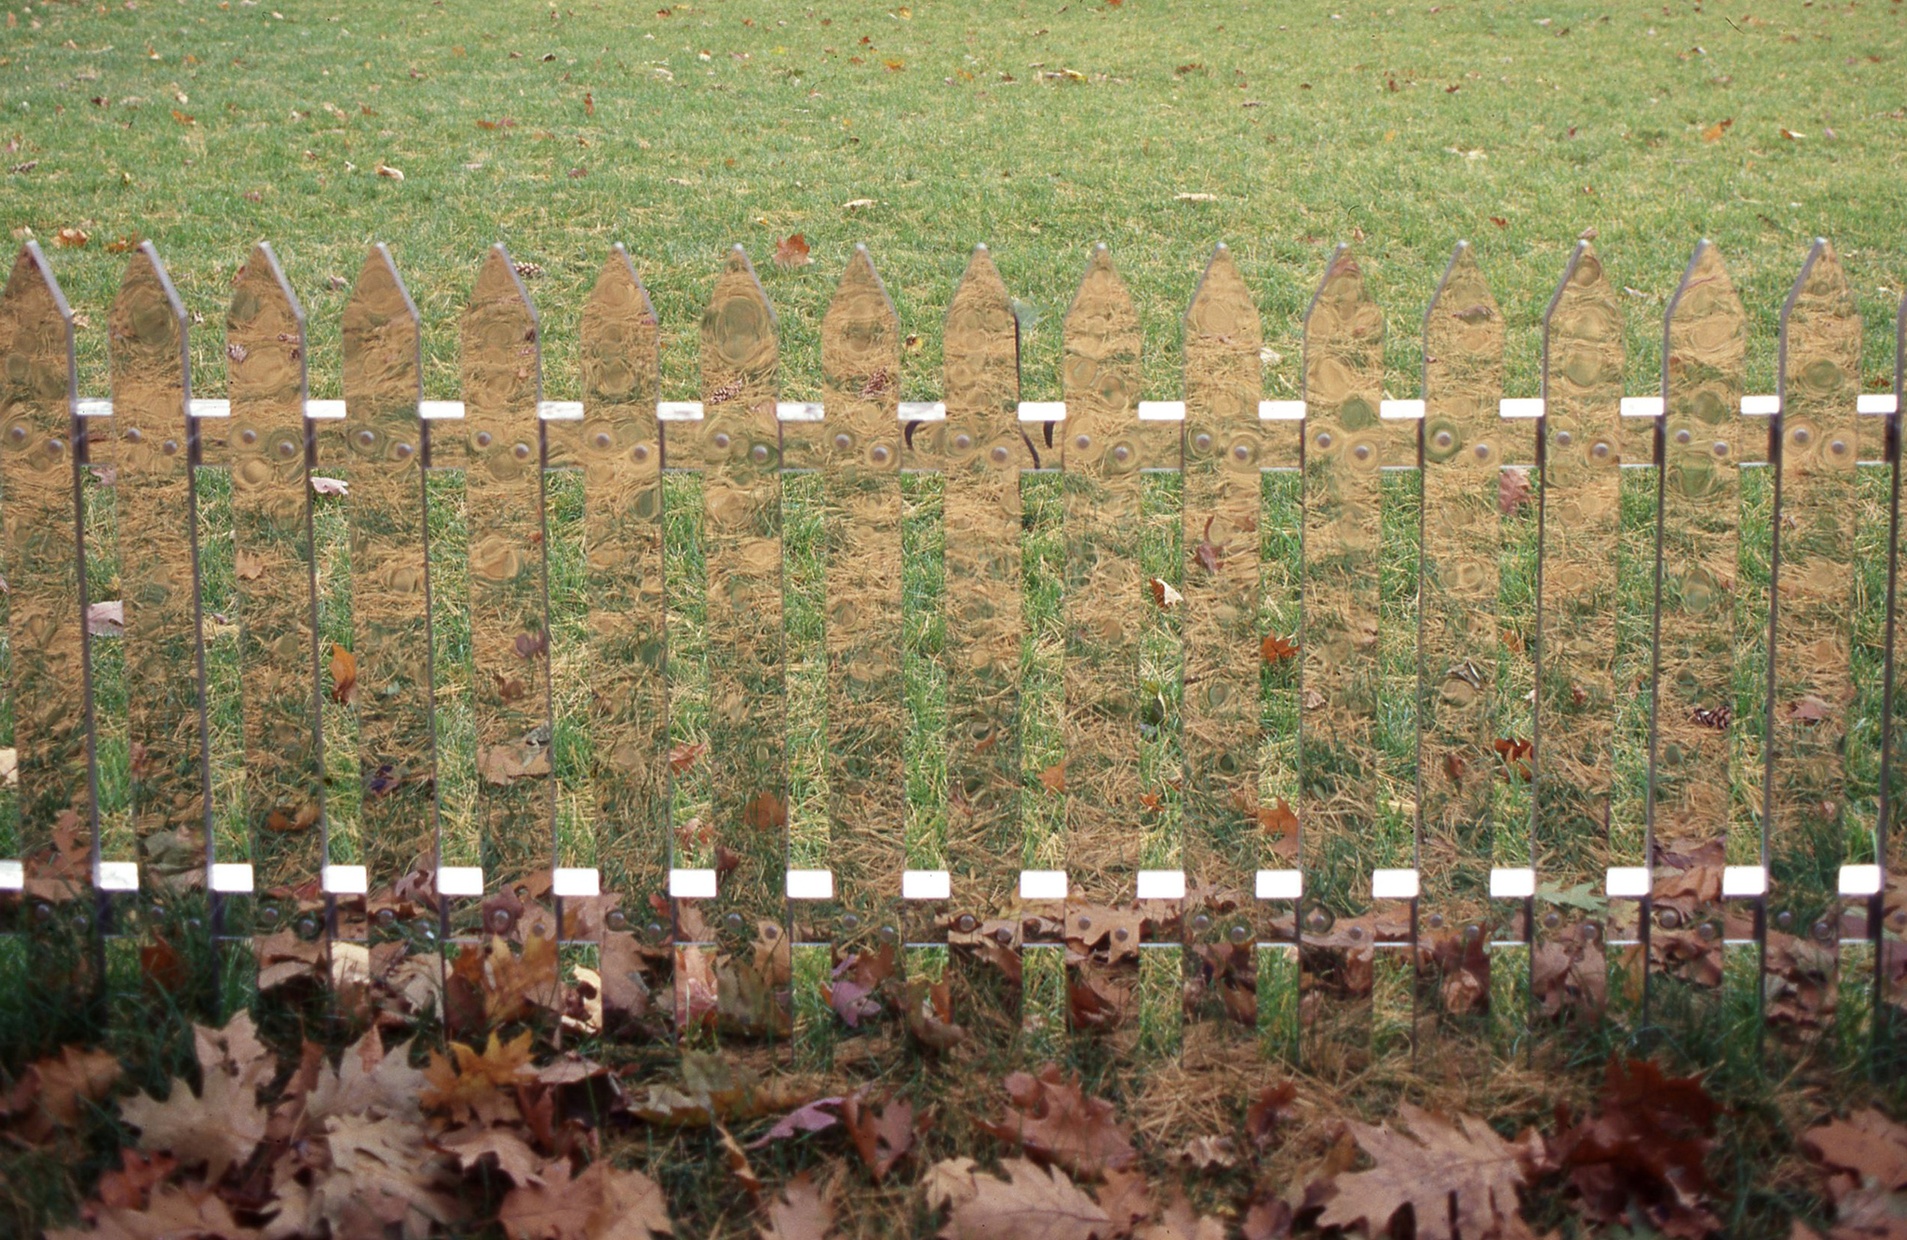 A picket fence made out of mirrors reflects grass and leaves with grass visible behind it.